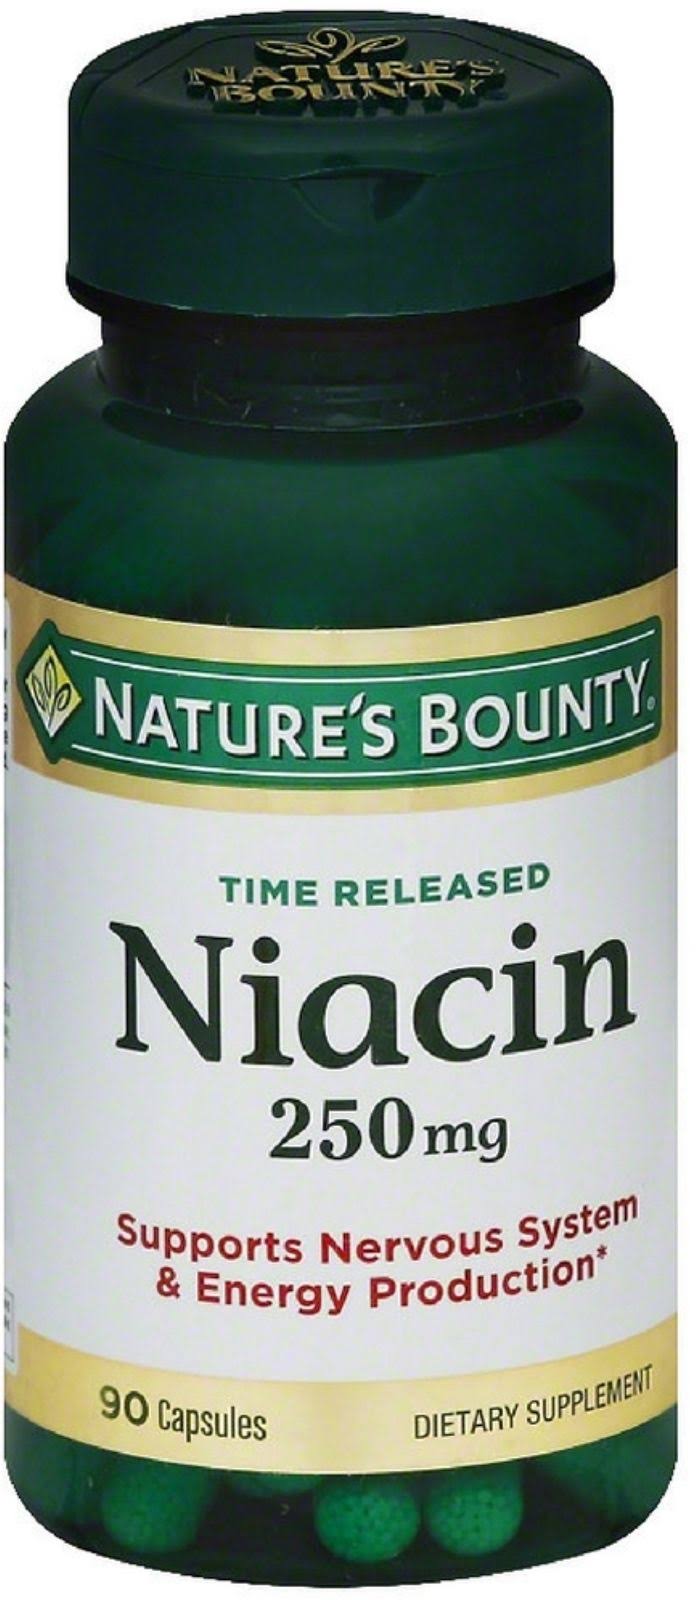 Nature's Bounty Time Released Niacin Dietary Supplement - 90 Capsules